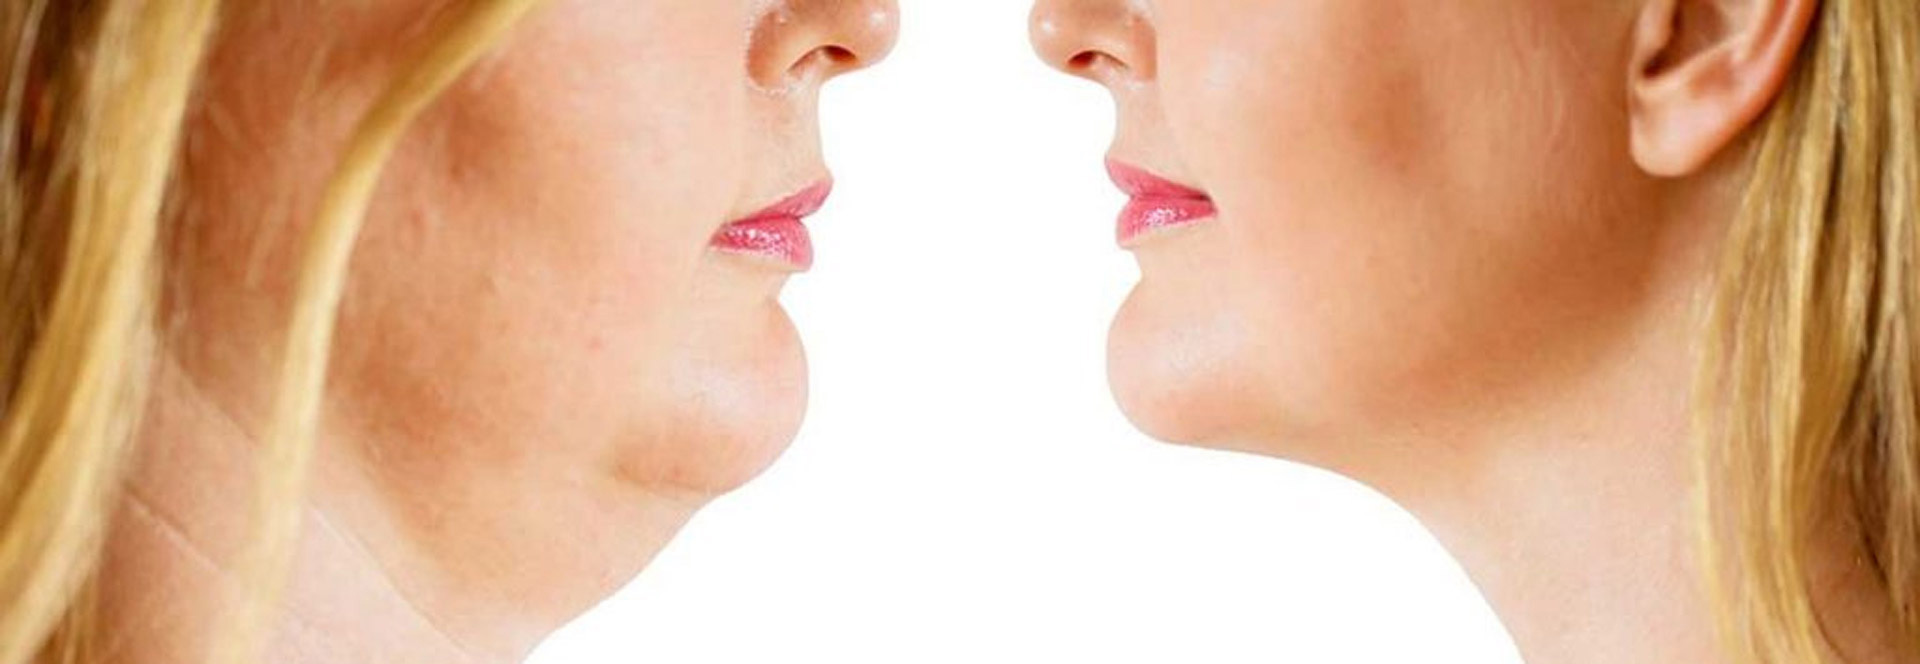 Aqualyx patient after fat removal from chin